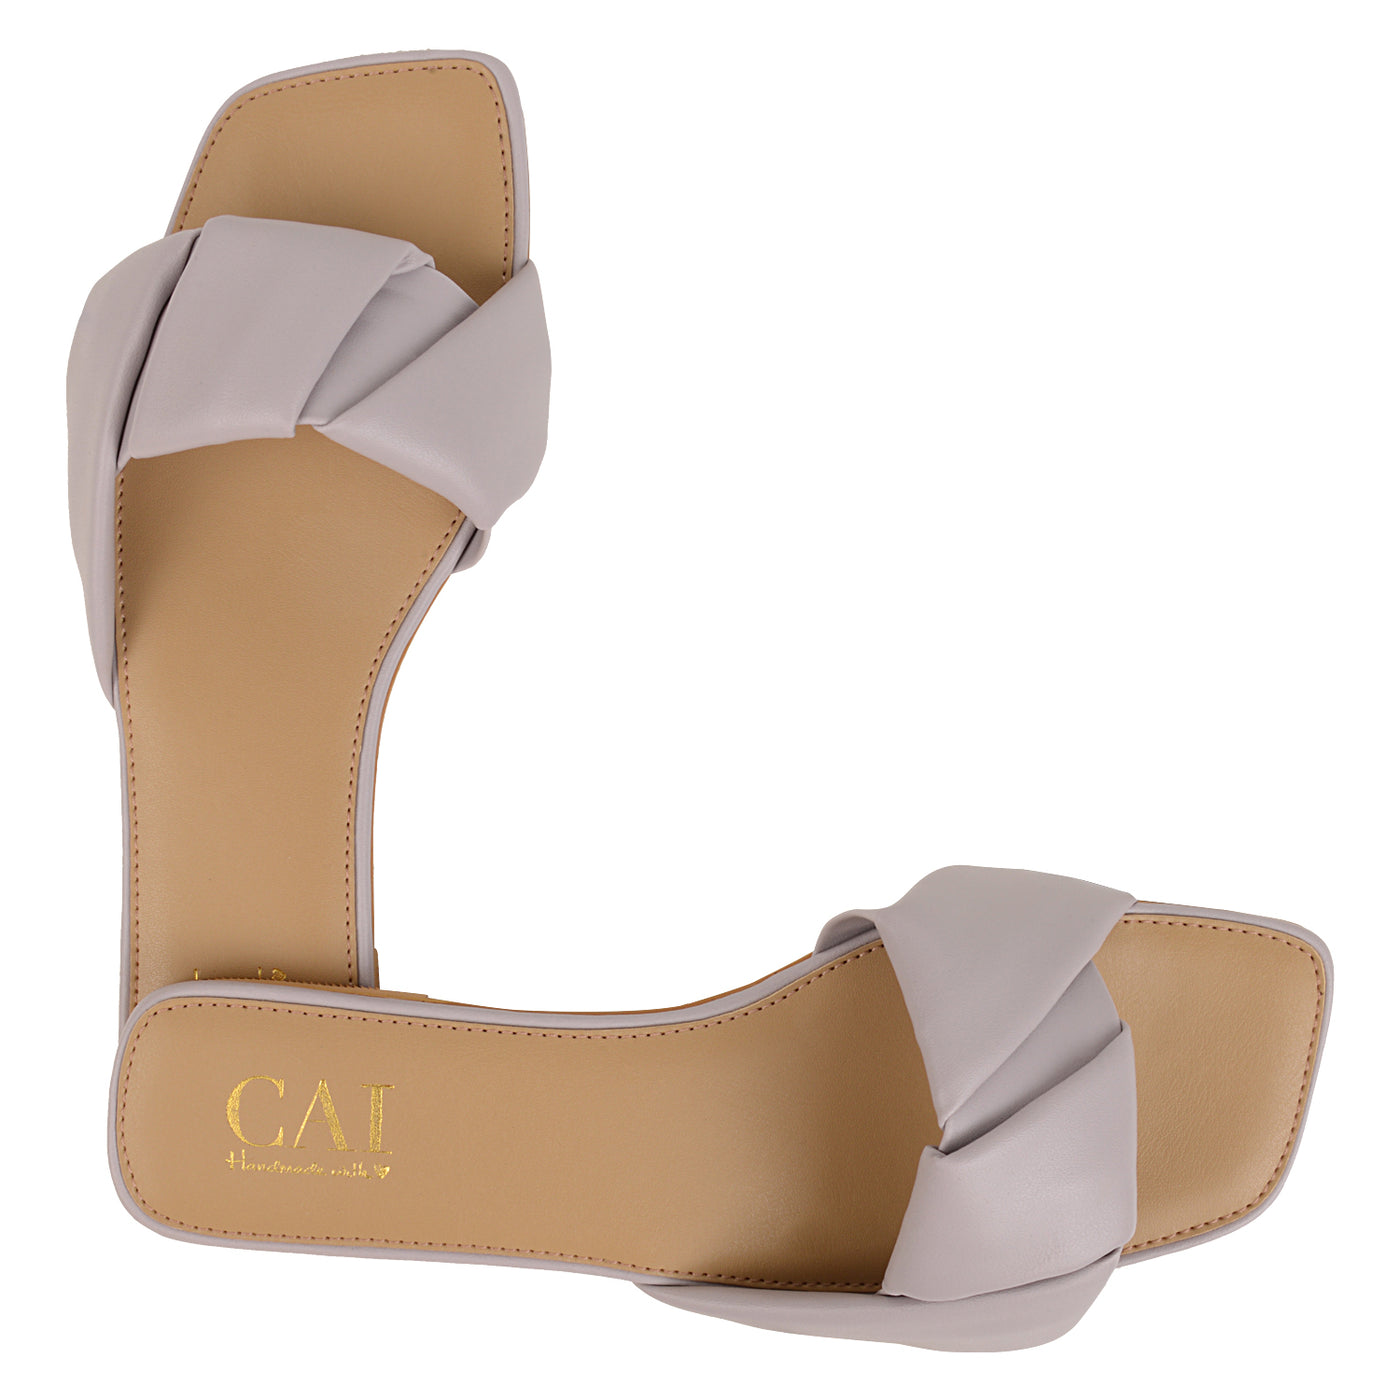 slip on sandals for women - the cai store